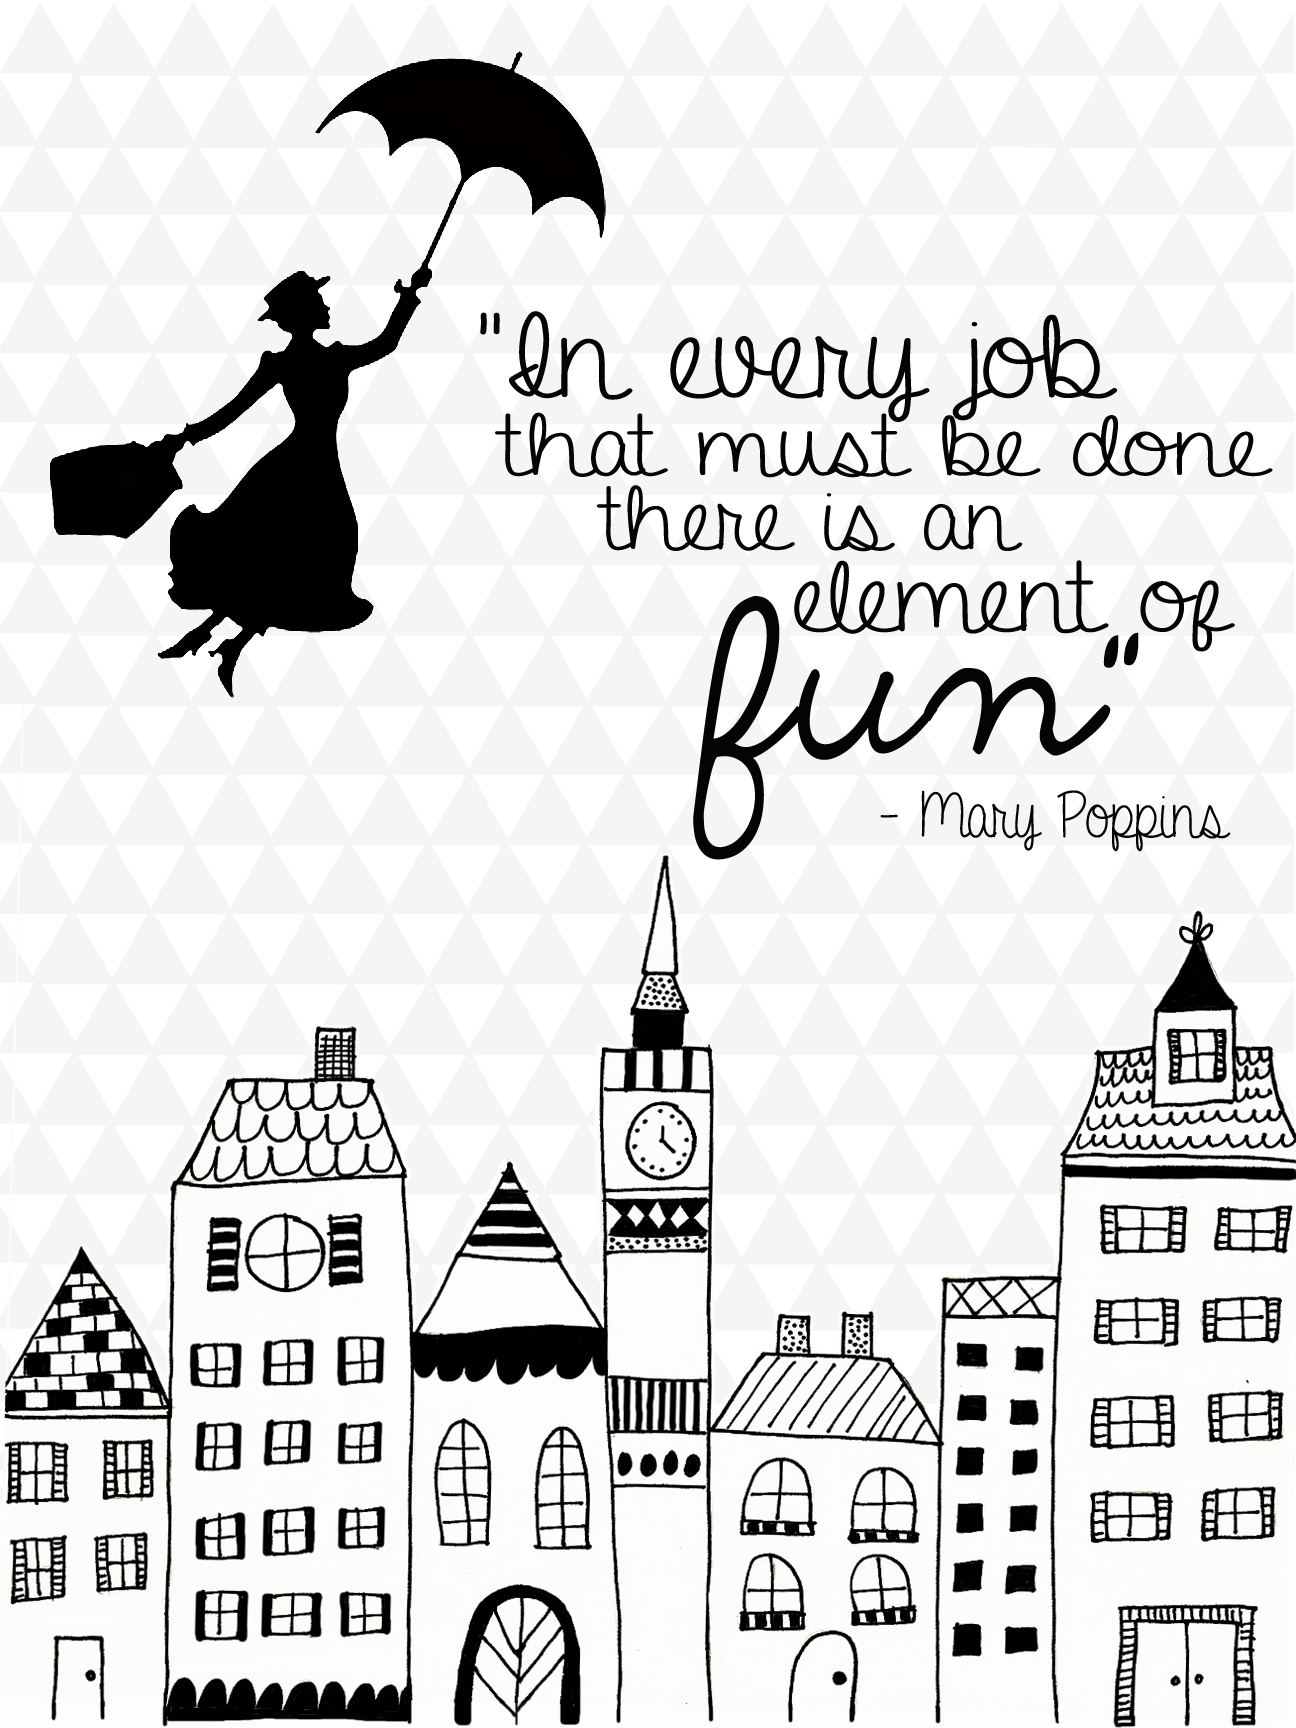 Mary Poppins Funny Quotes